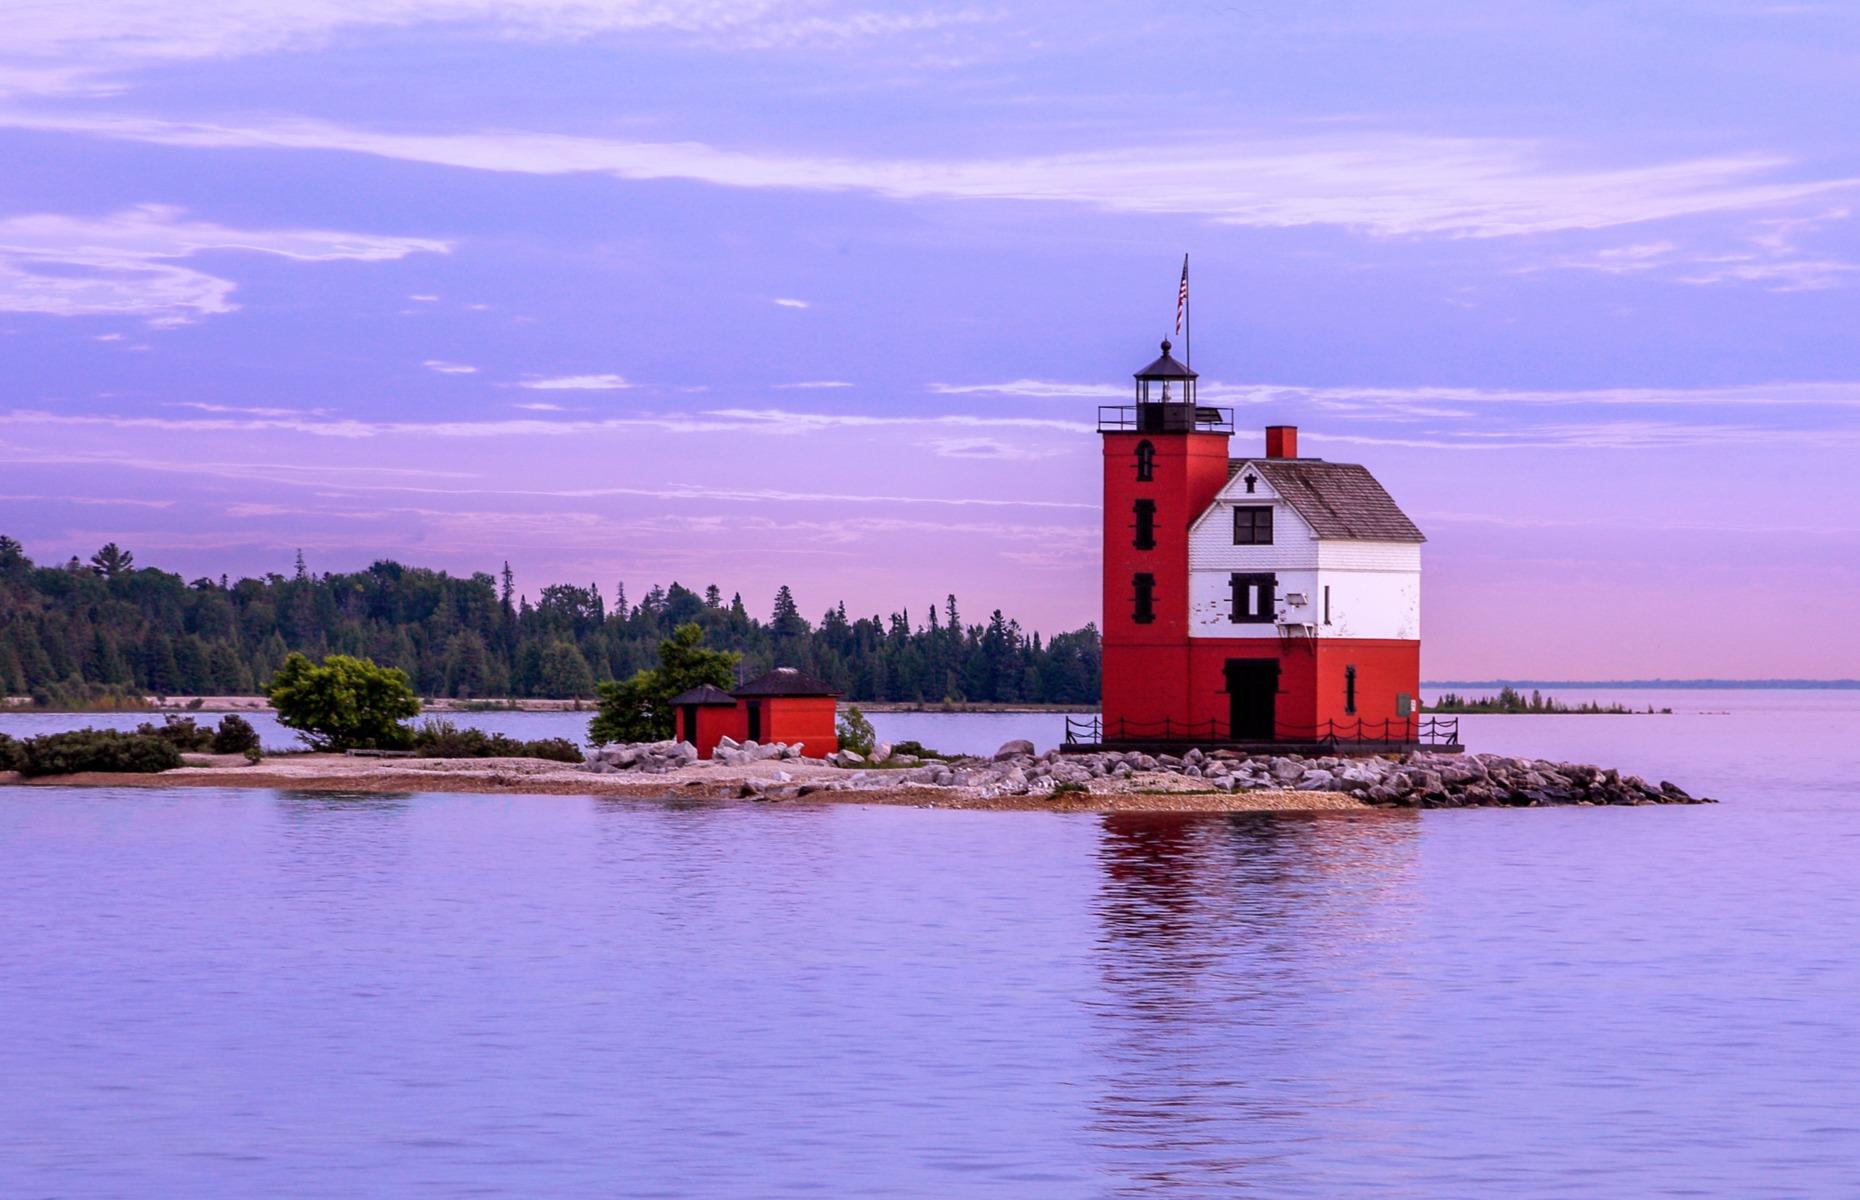 Standing out against a vivid pink sunset, it’s easy to see why photographers love Round Island Light. Built in 1892 to shine a light across the channels between Round Island and Mackinac Island, it features a 57-foot (17m) brick tower topped with a hexagonal lantern room, plus adjoining keepers’ quarters. The light station was badly damaged by a storm in 1972, which chipped a section off the bottom, but thanks to extensive restoration its former charm has been revived.